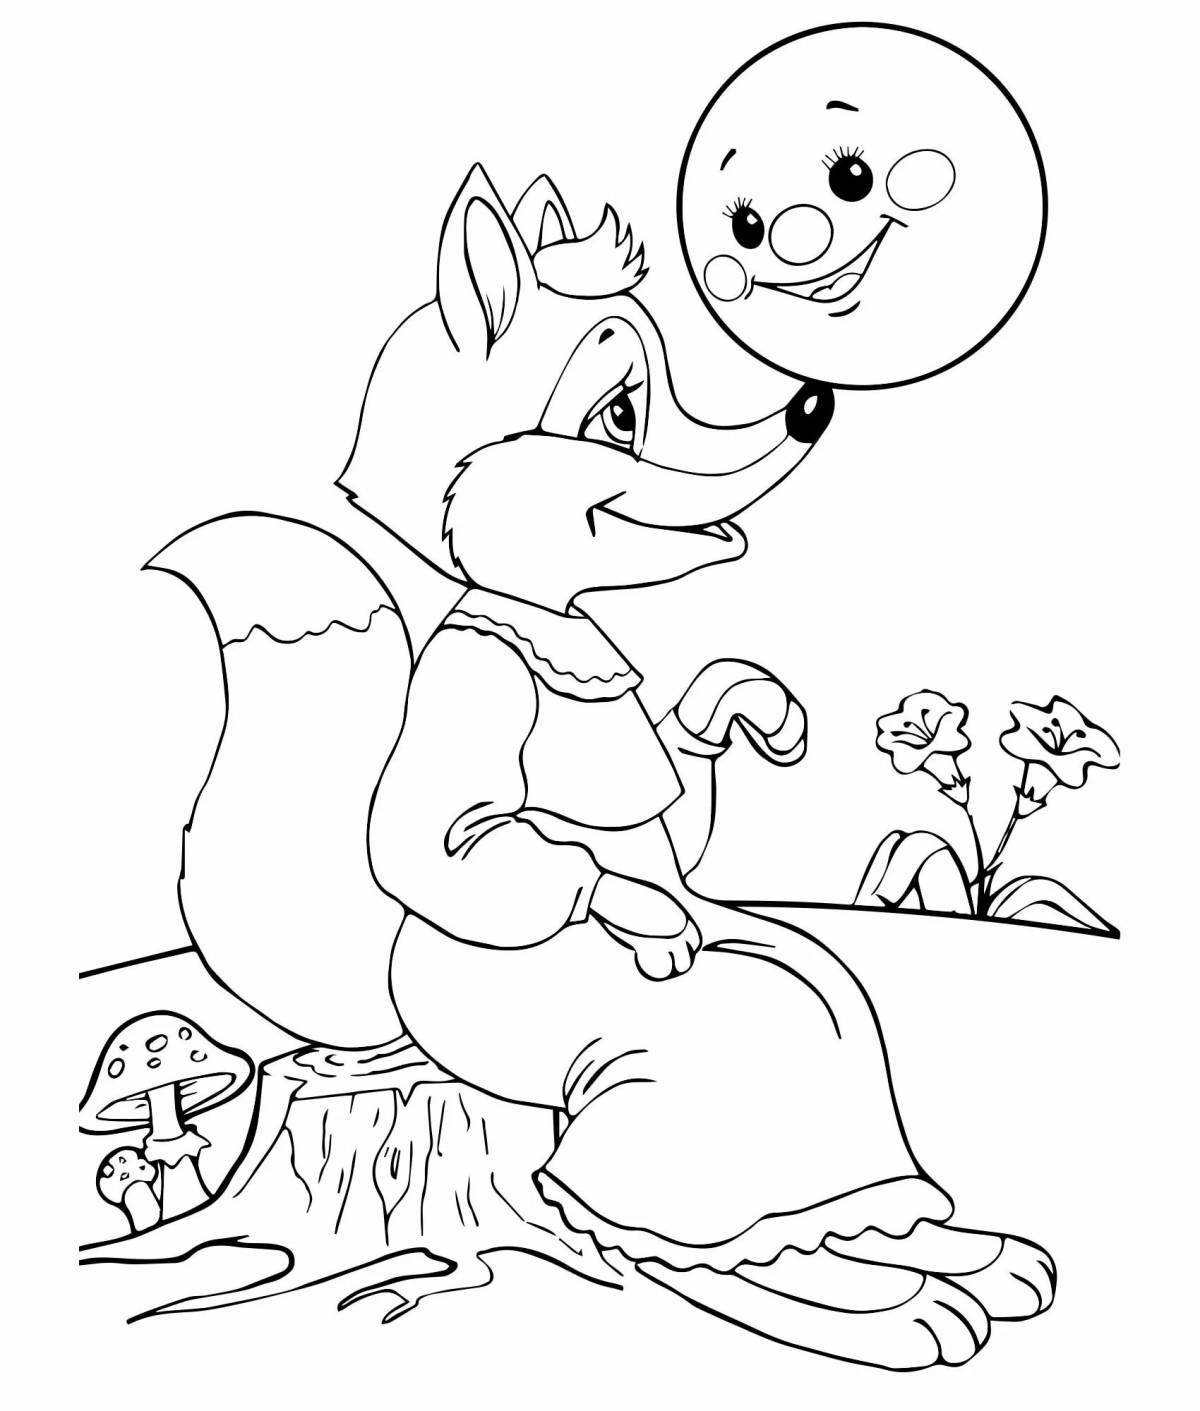 Coloring book cute hare and bun